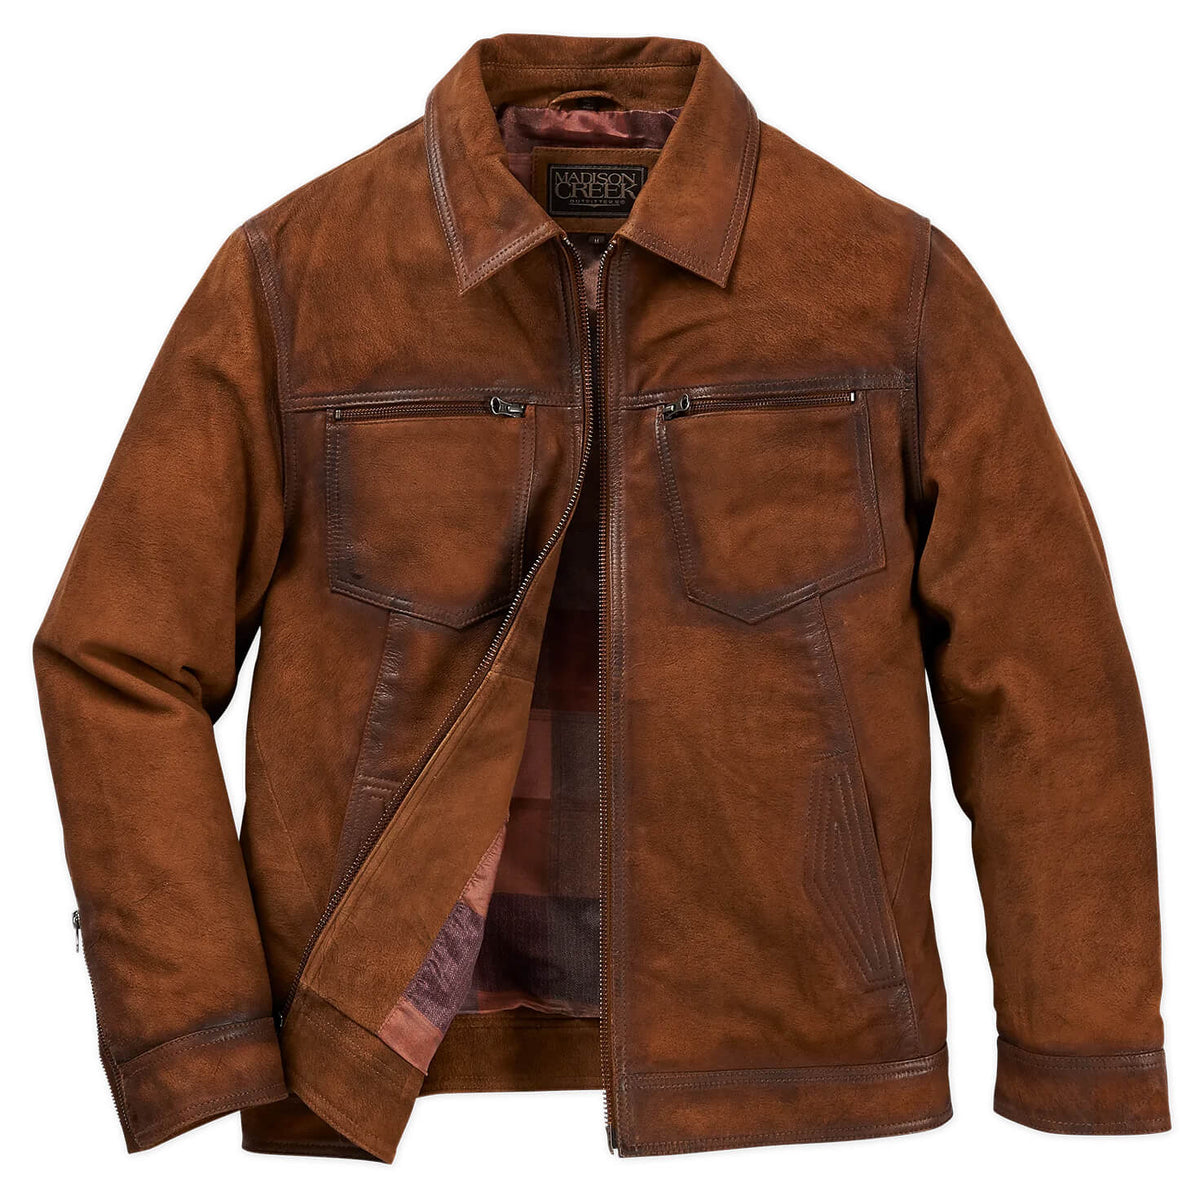 Steamboat Goat Suede Distressed Leather Jacket